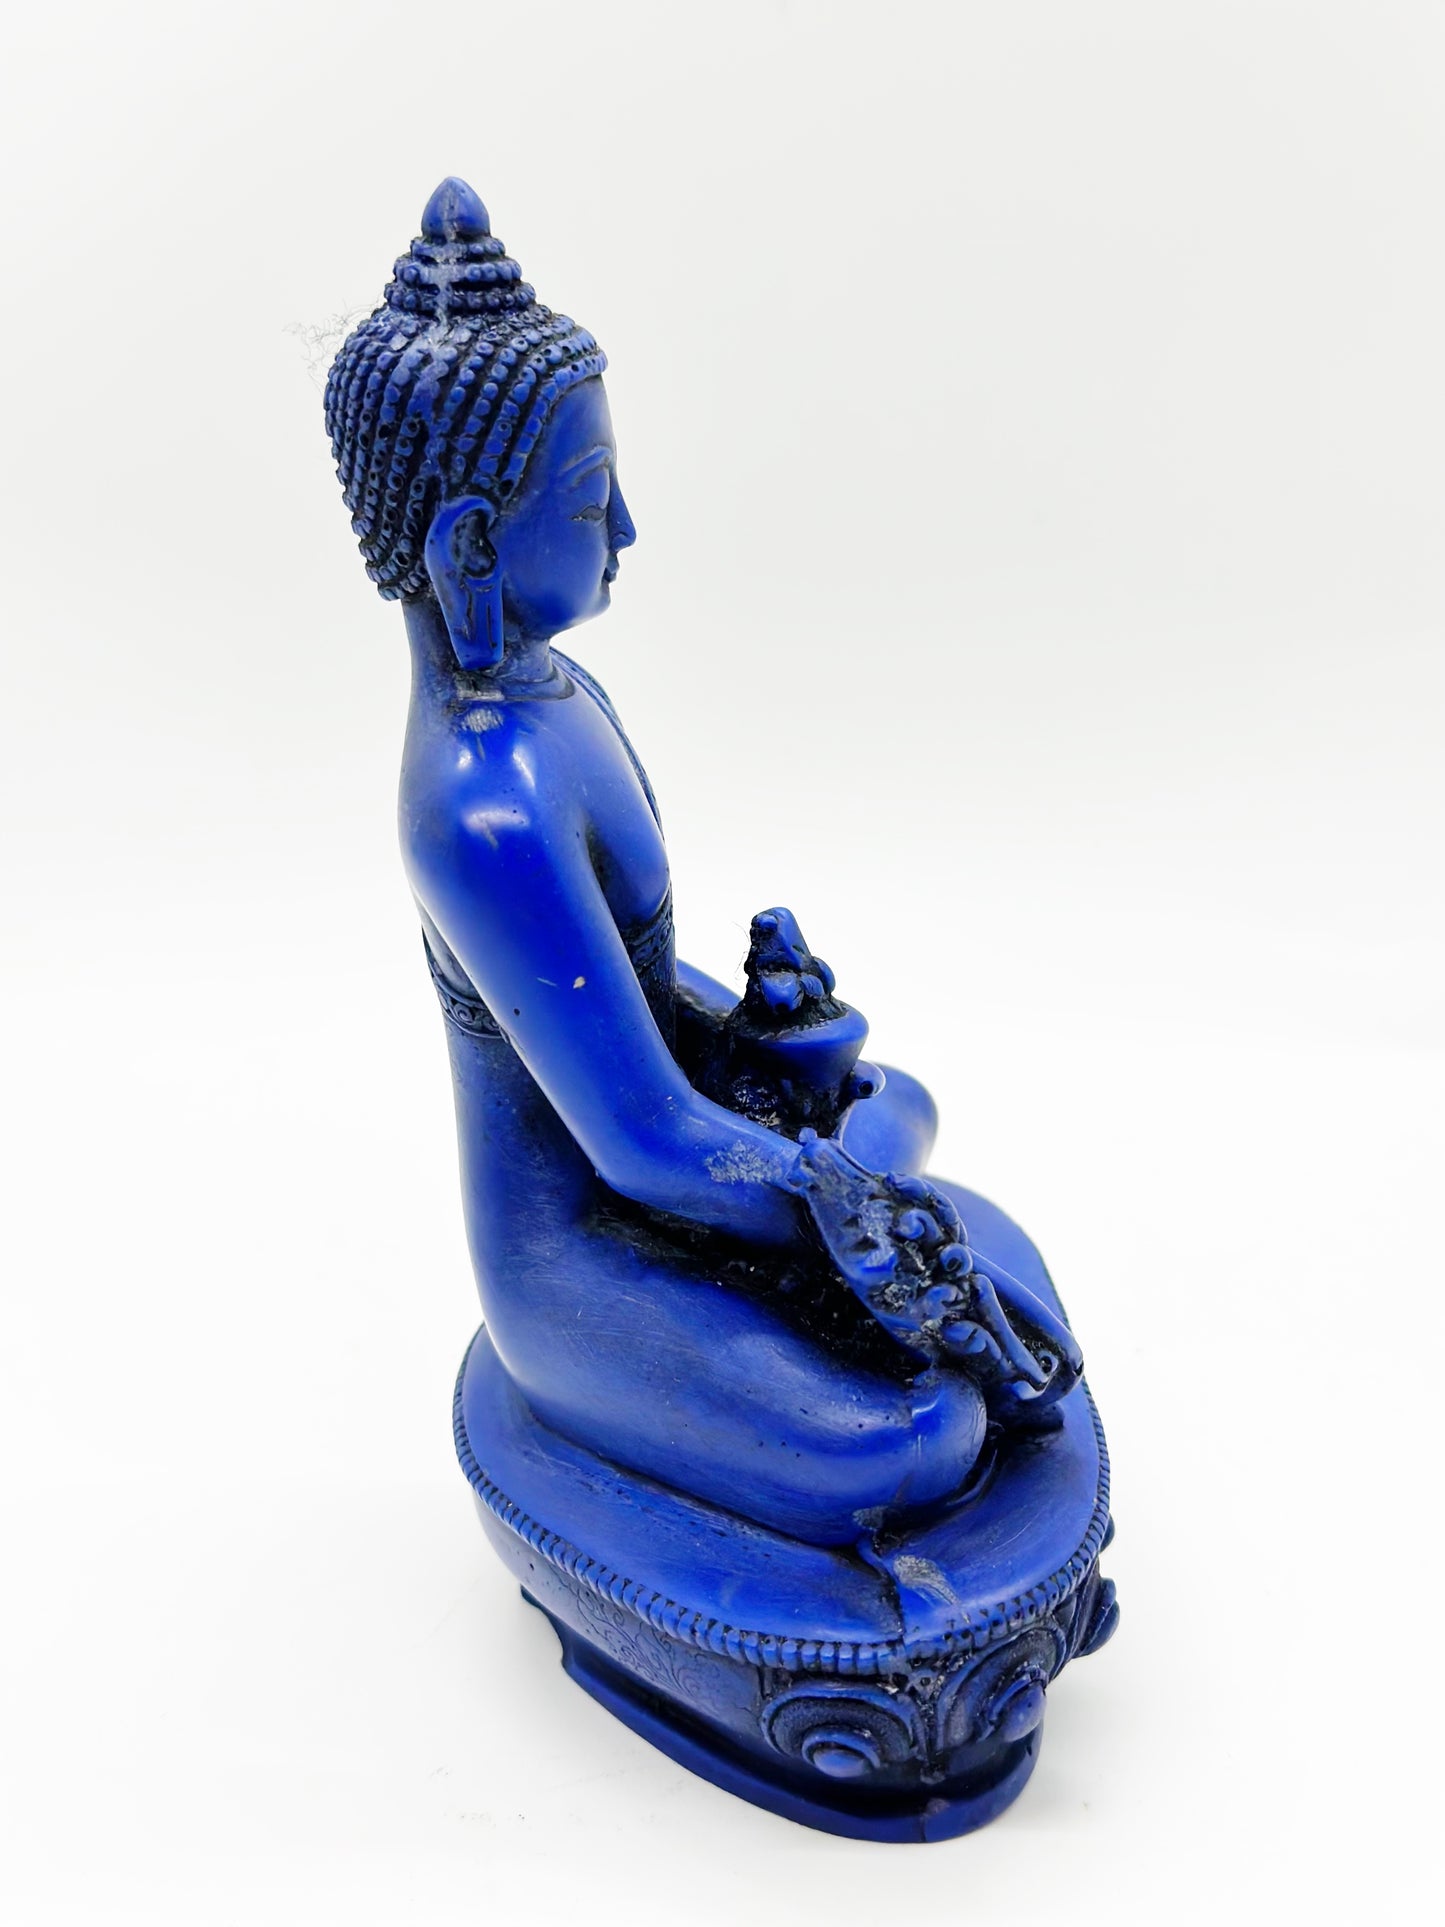 6498 -  Blue Medicine Buddha For Good Health - 5 1/4 Inches Height